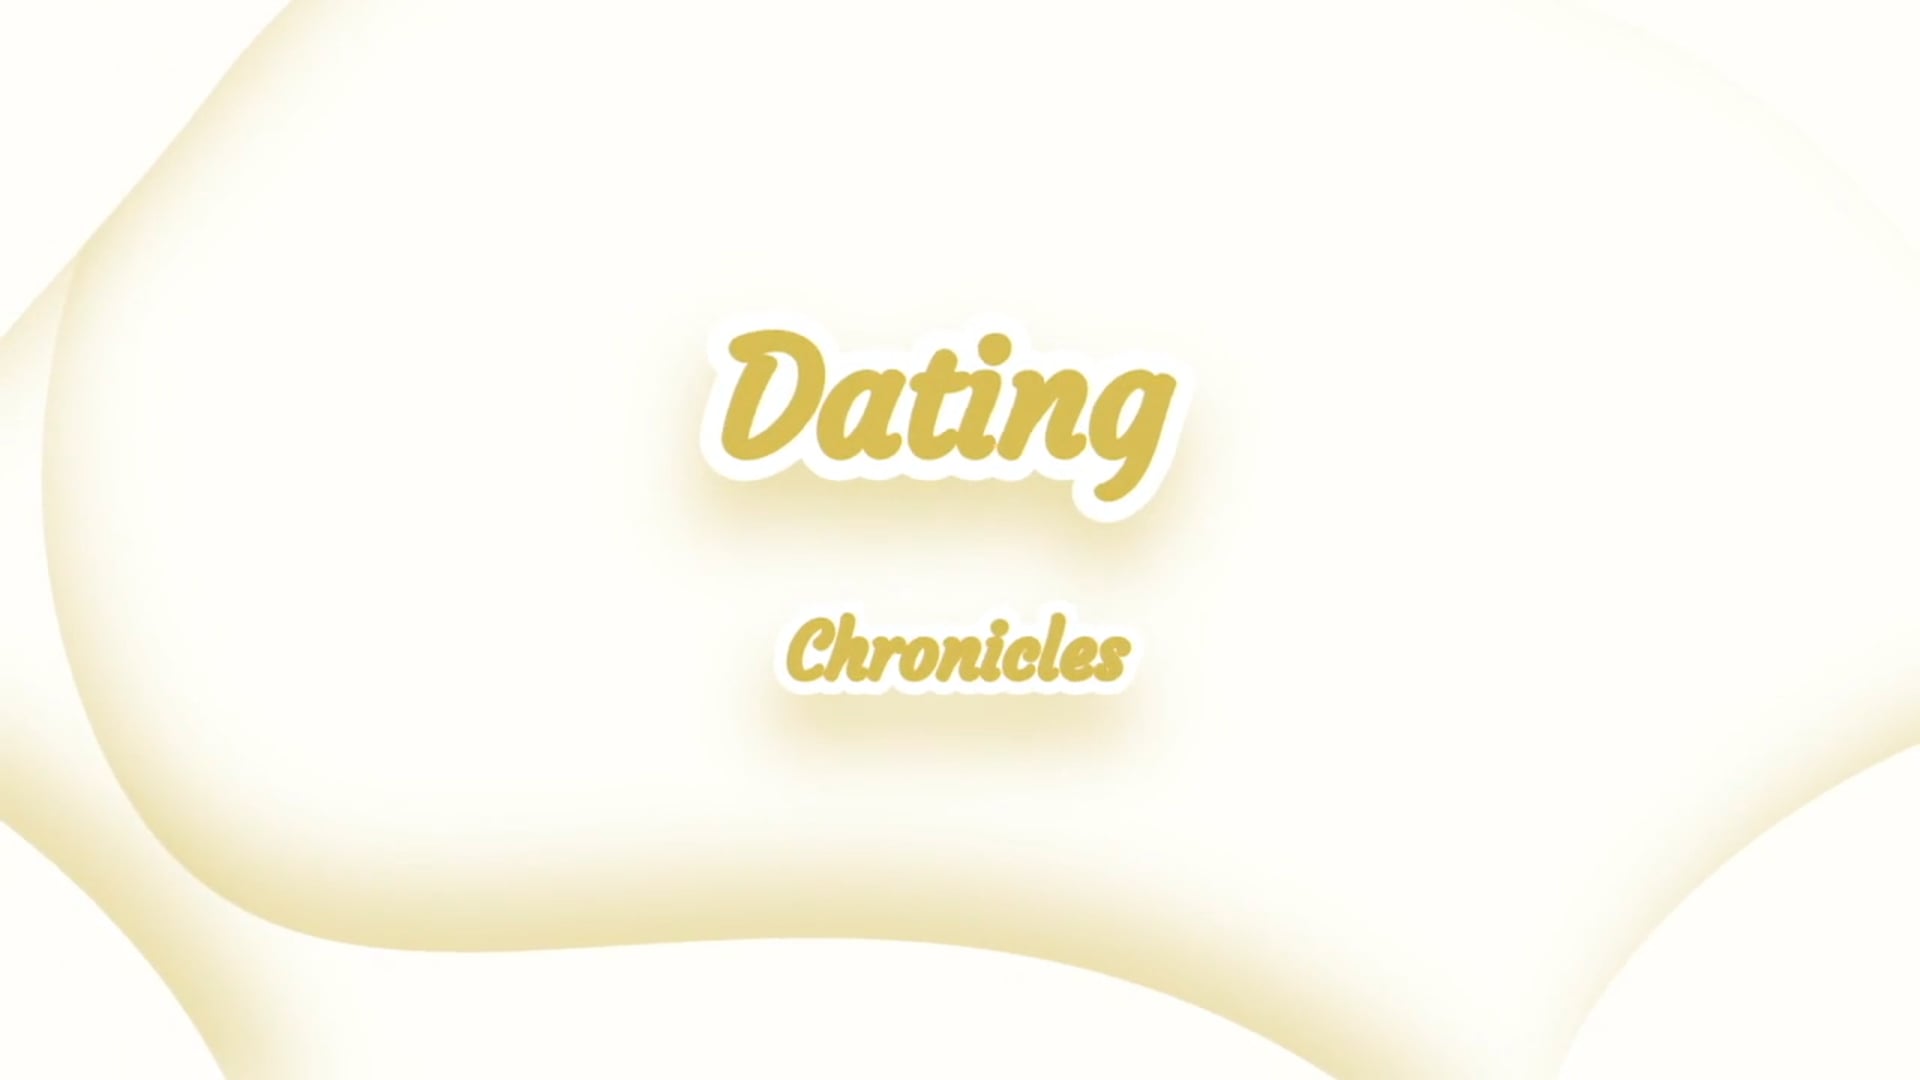 Dating Chronicles Sizzle Reel